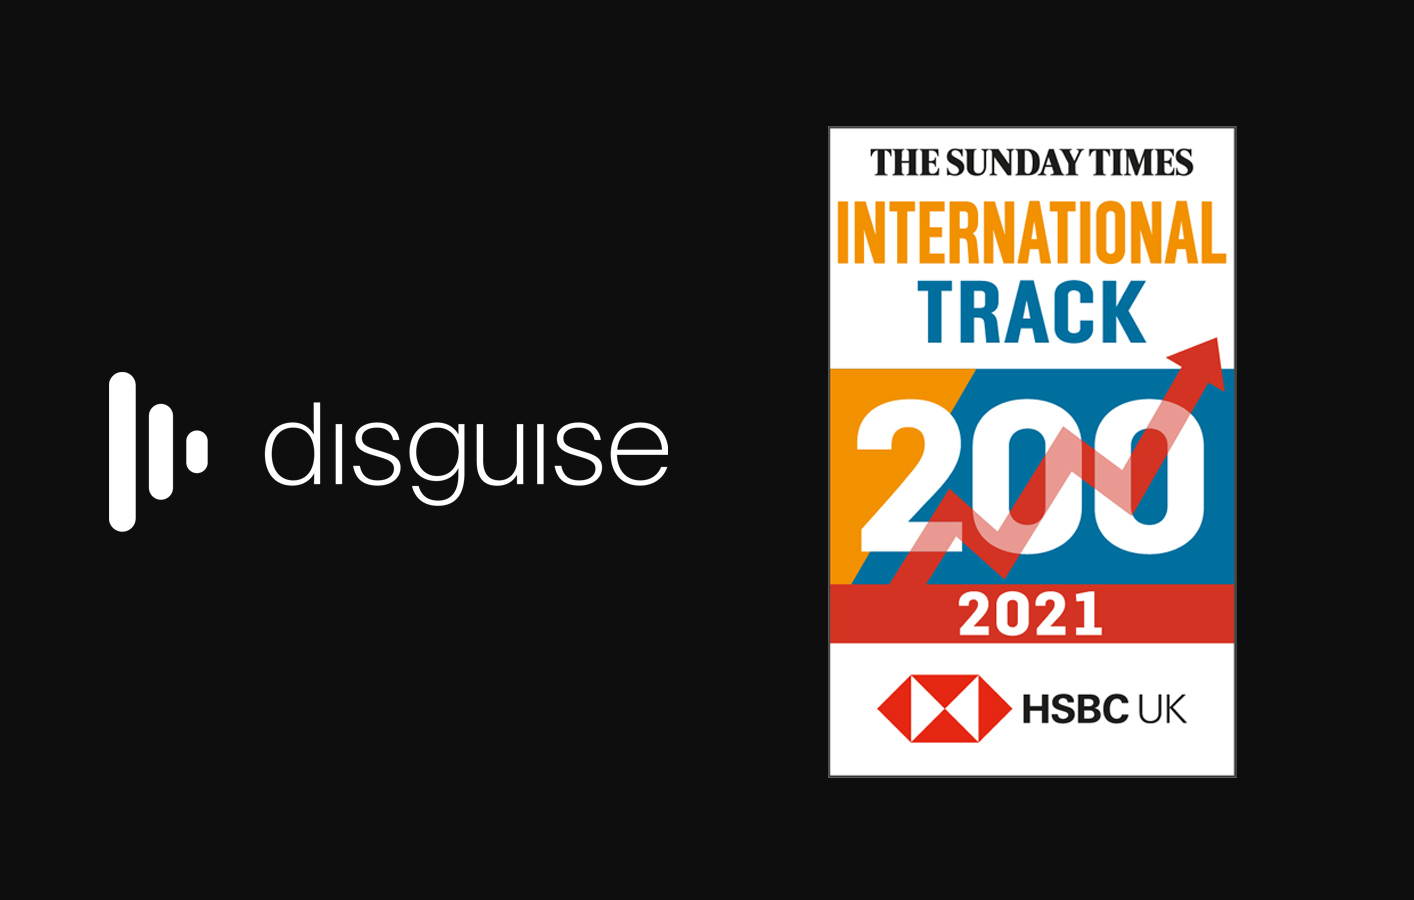 disguise in the 12th annual Sunday Times HSBC International Track 200;